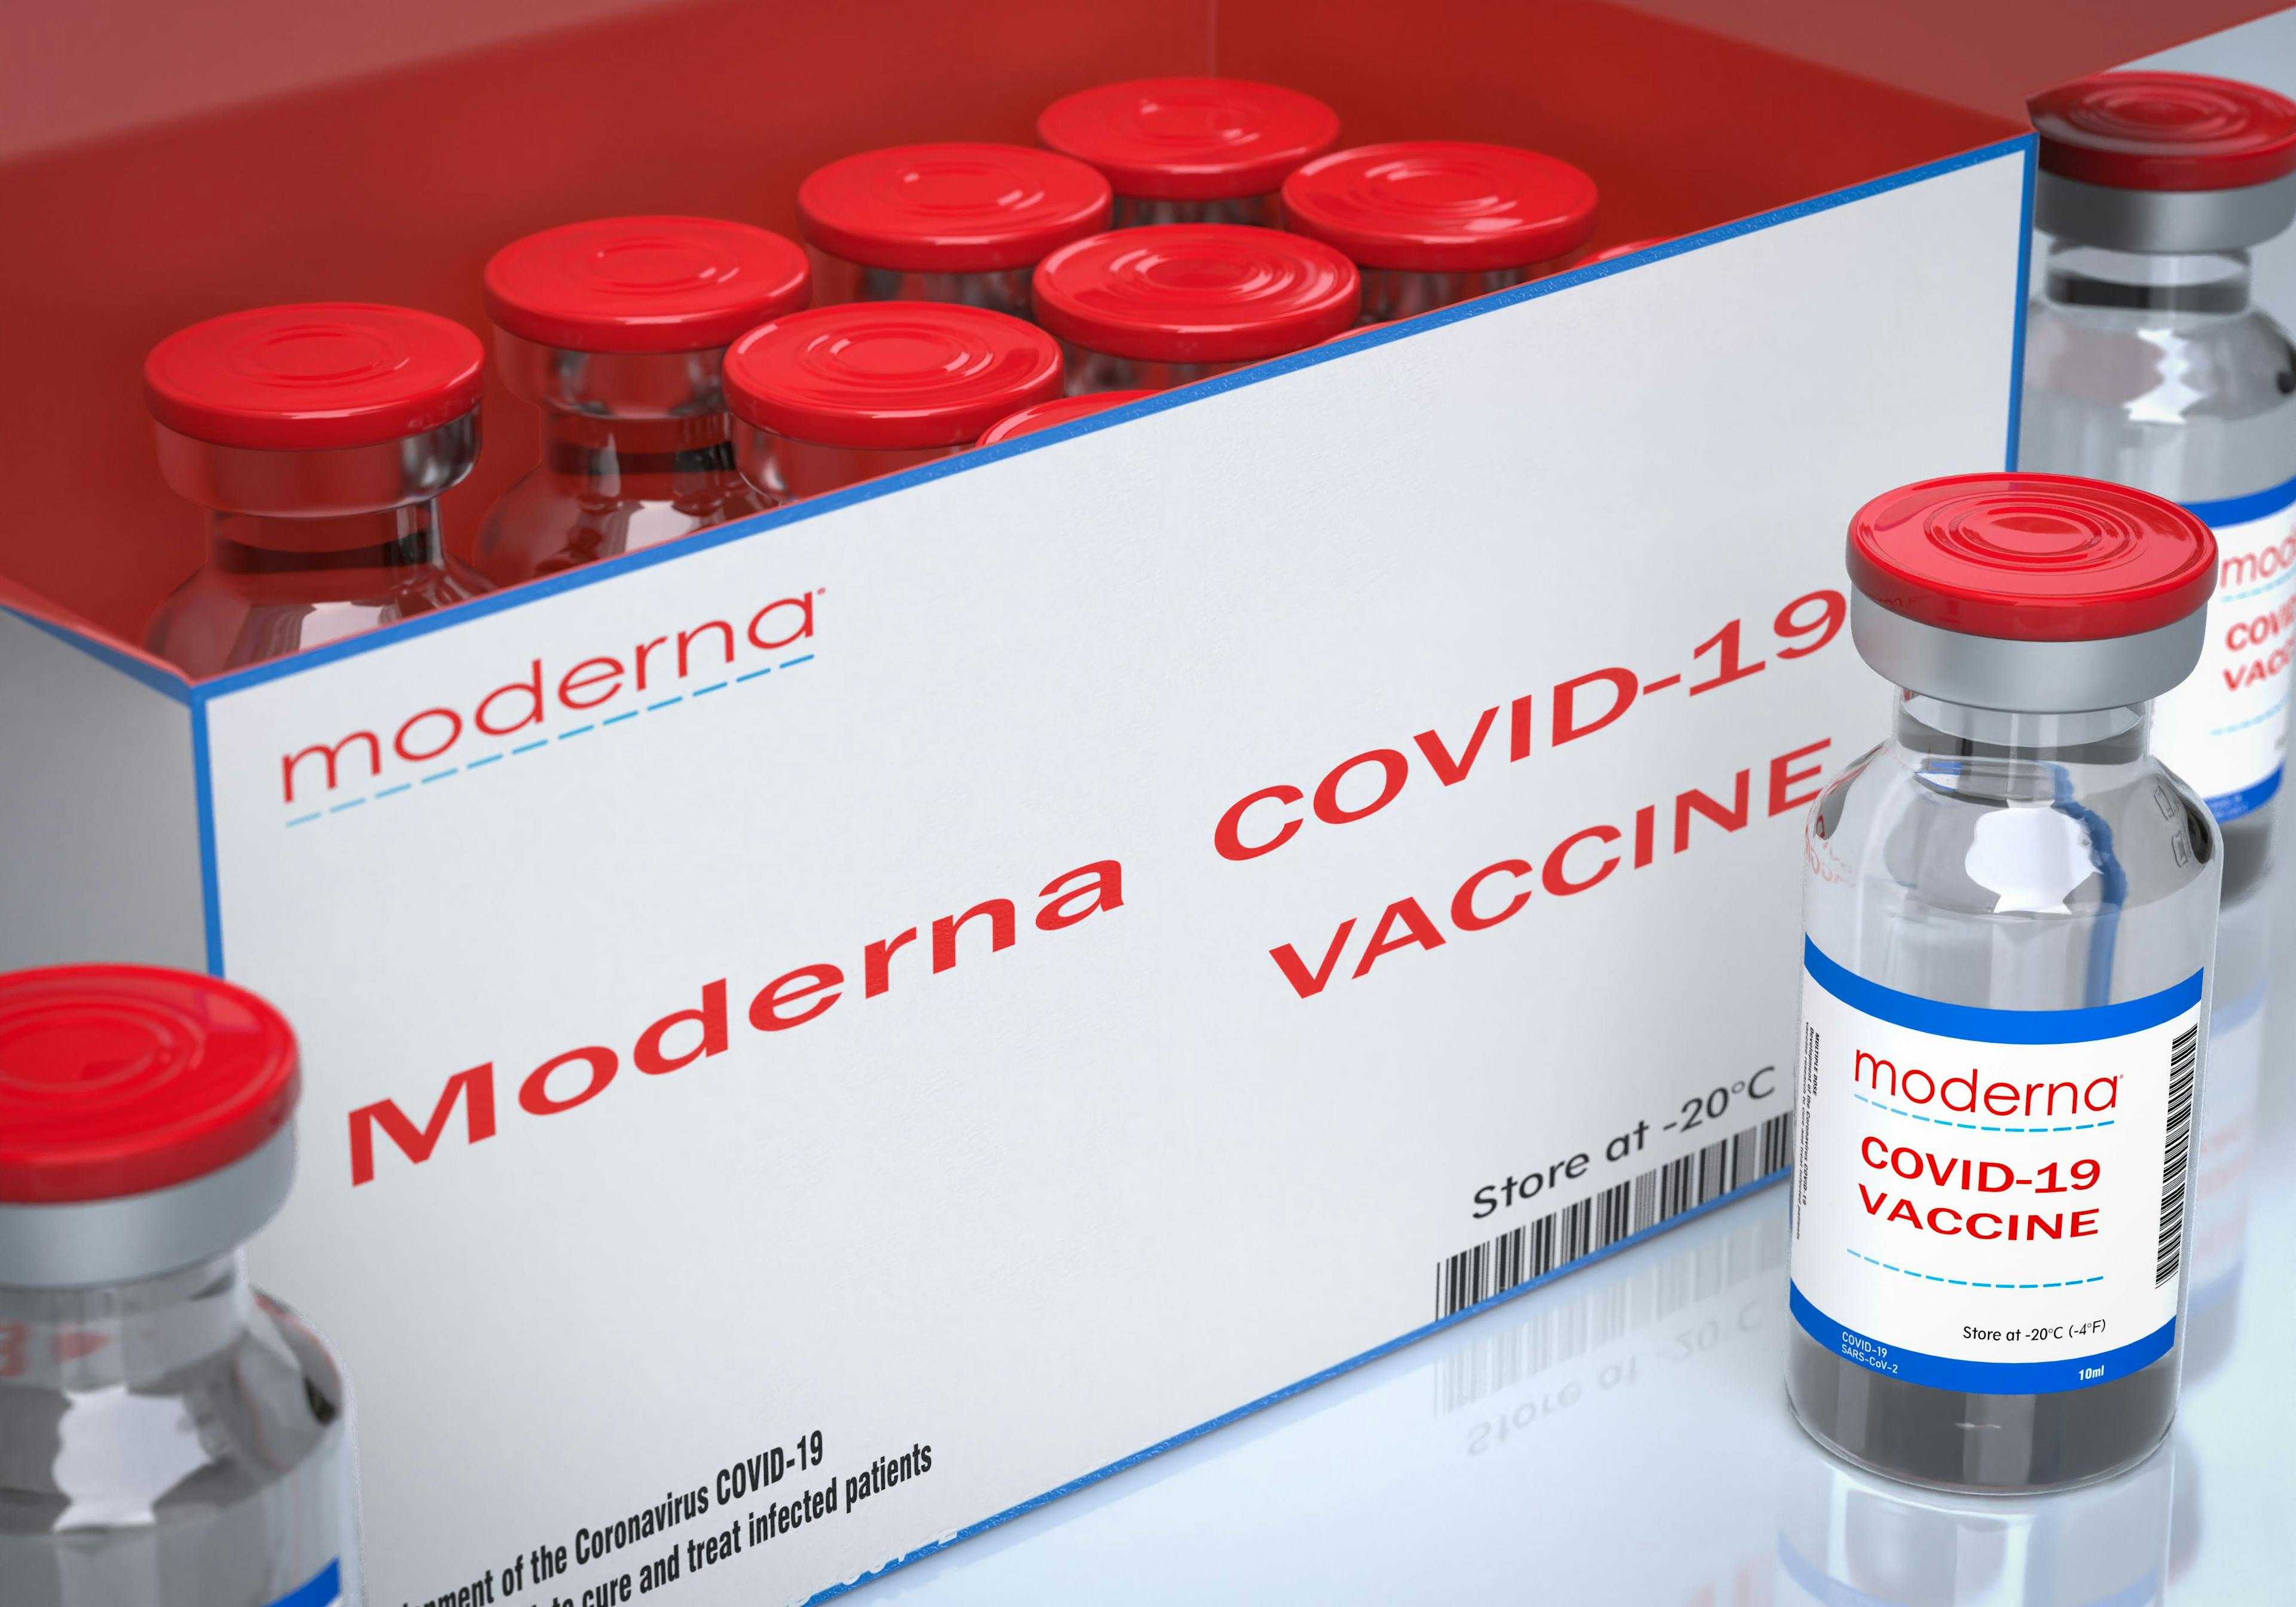 Moderna Plans to Offer Free COVID-19 Vaccine to Uninsured Patients